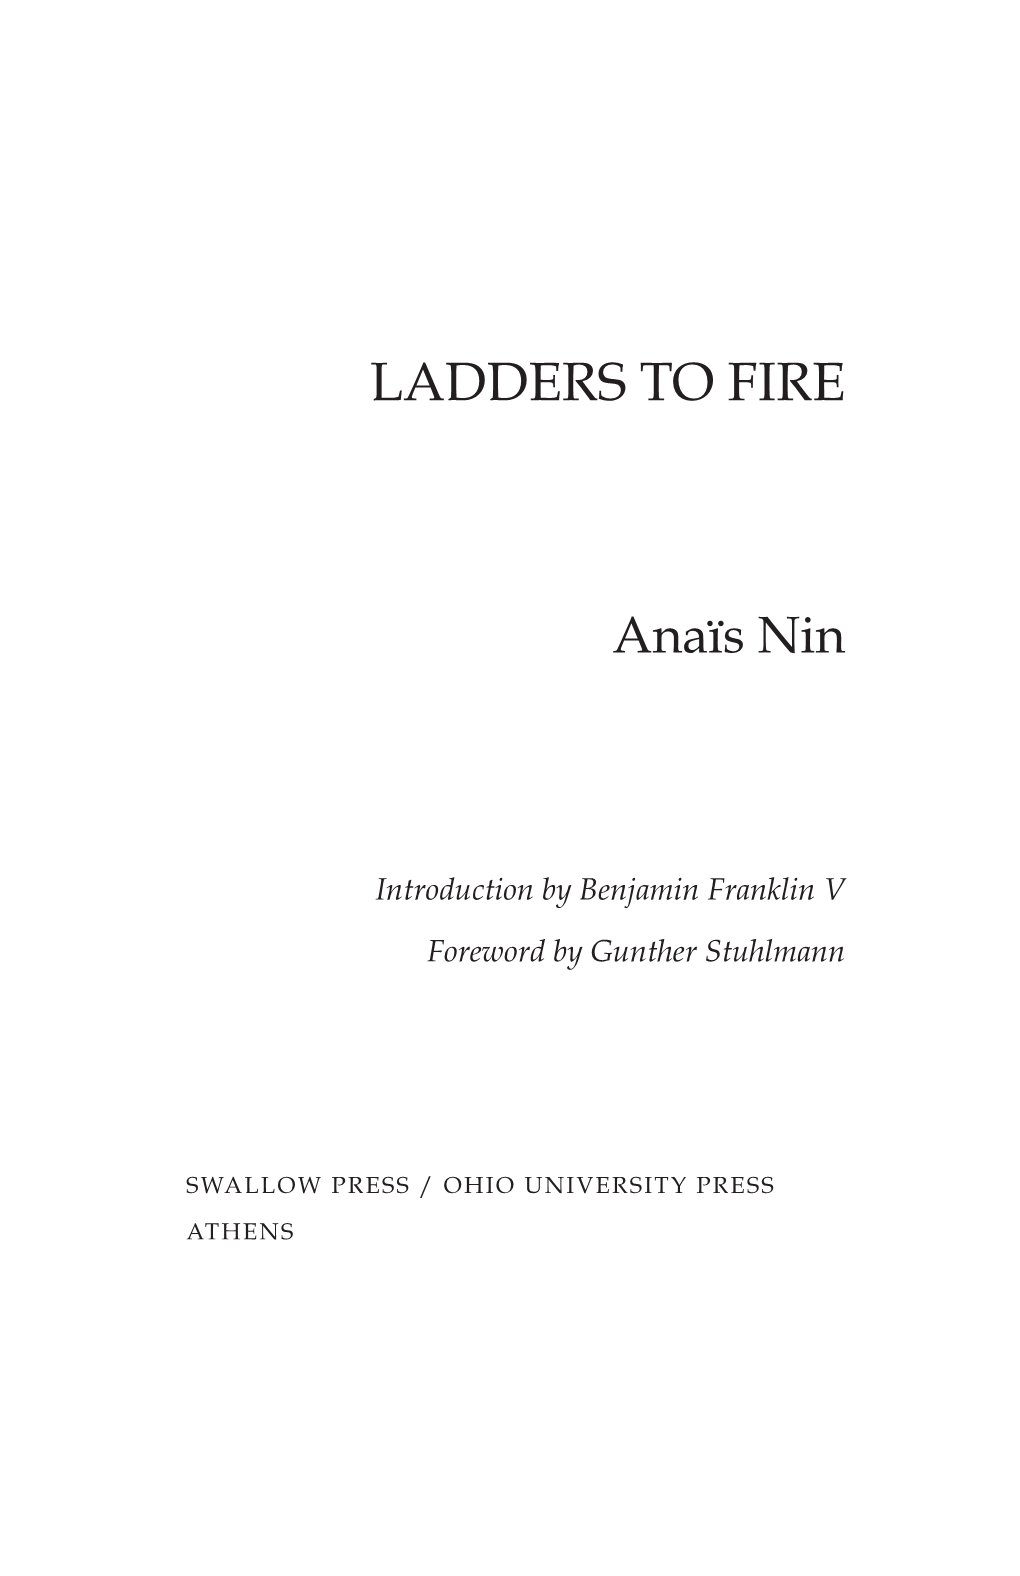 Ladders to Fire